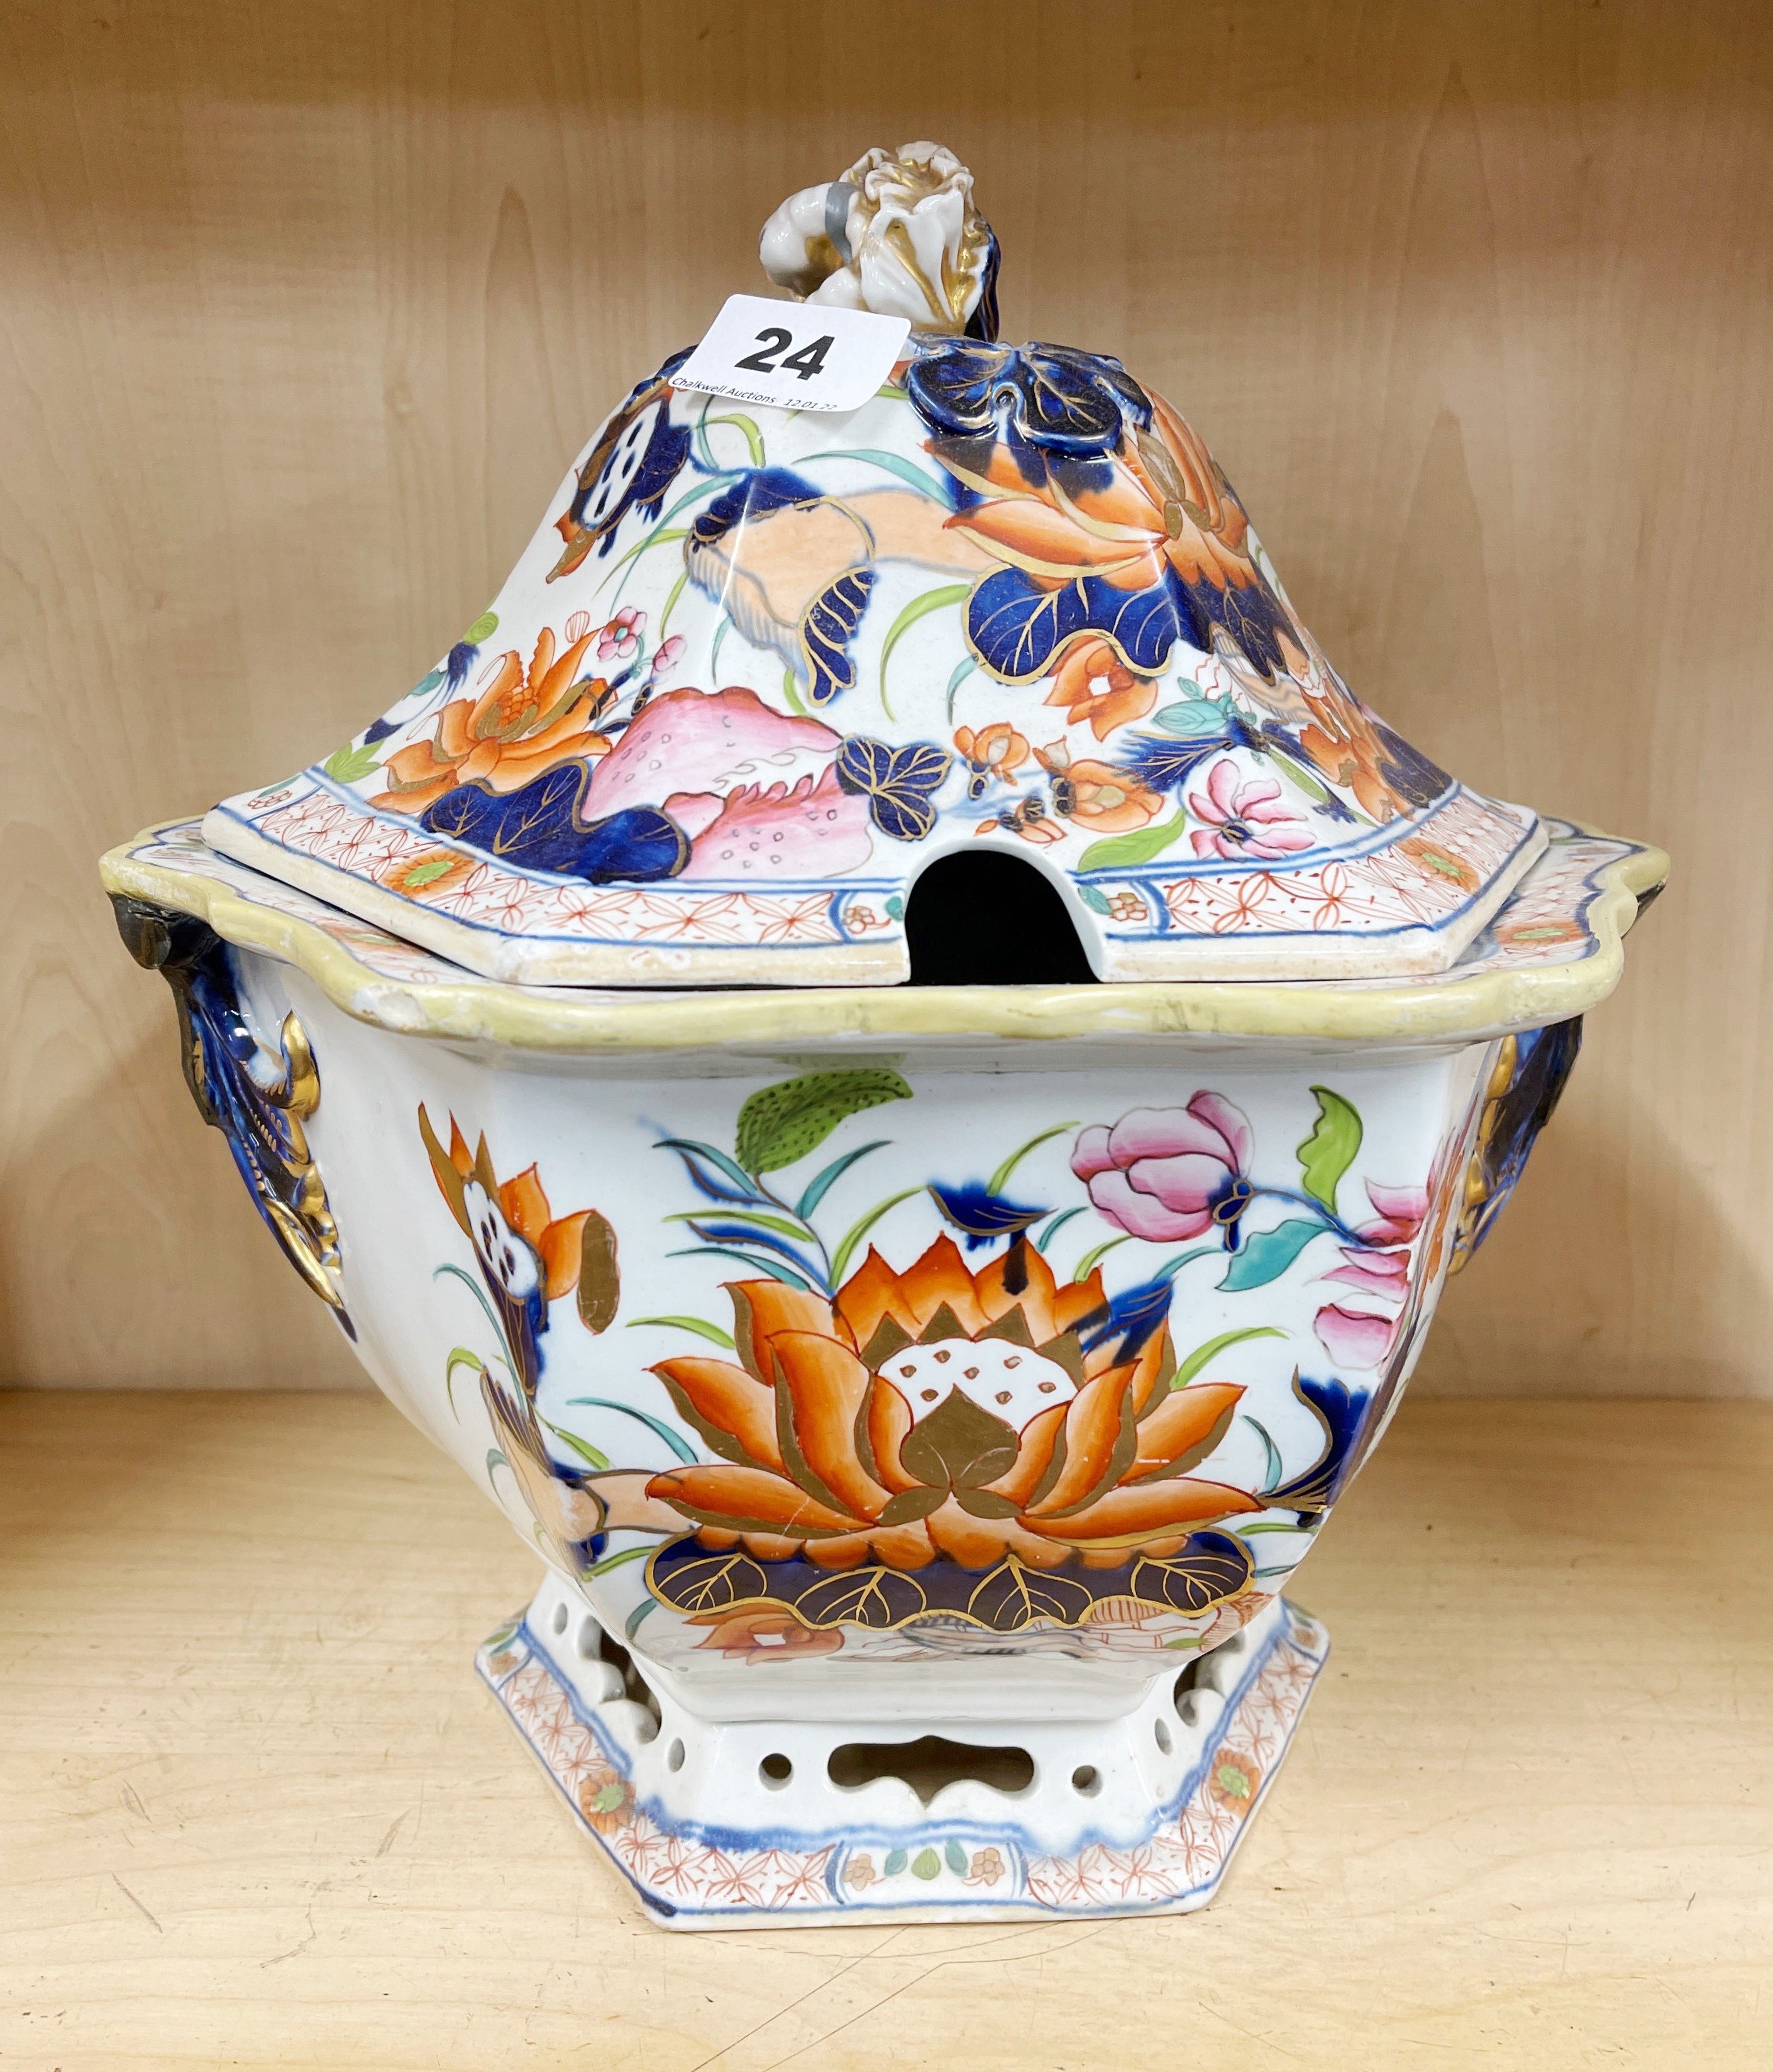 A 19th century Mason's ironstone soup tureen and cover, H. 31cm. Some minor damage.